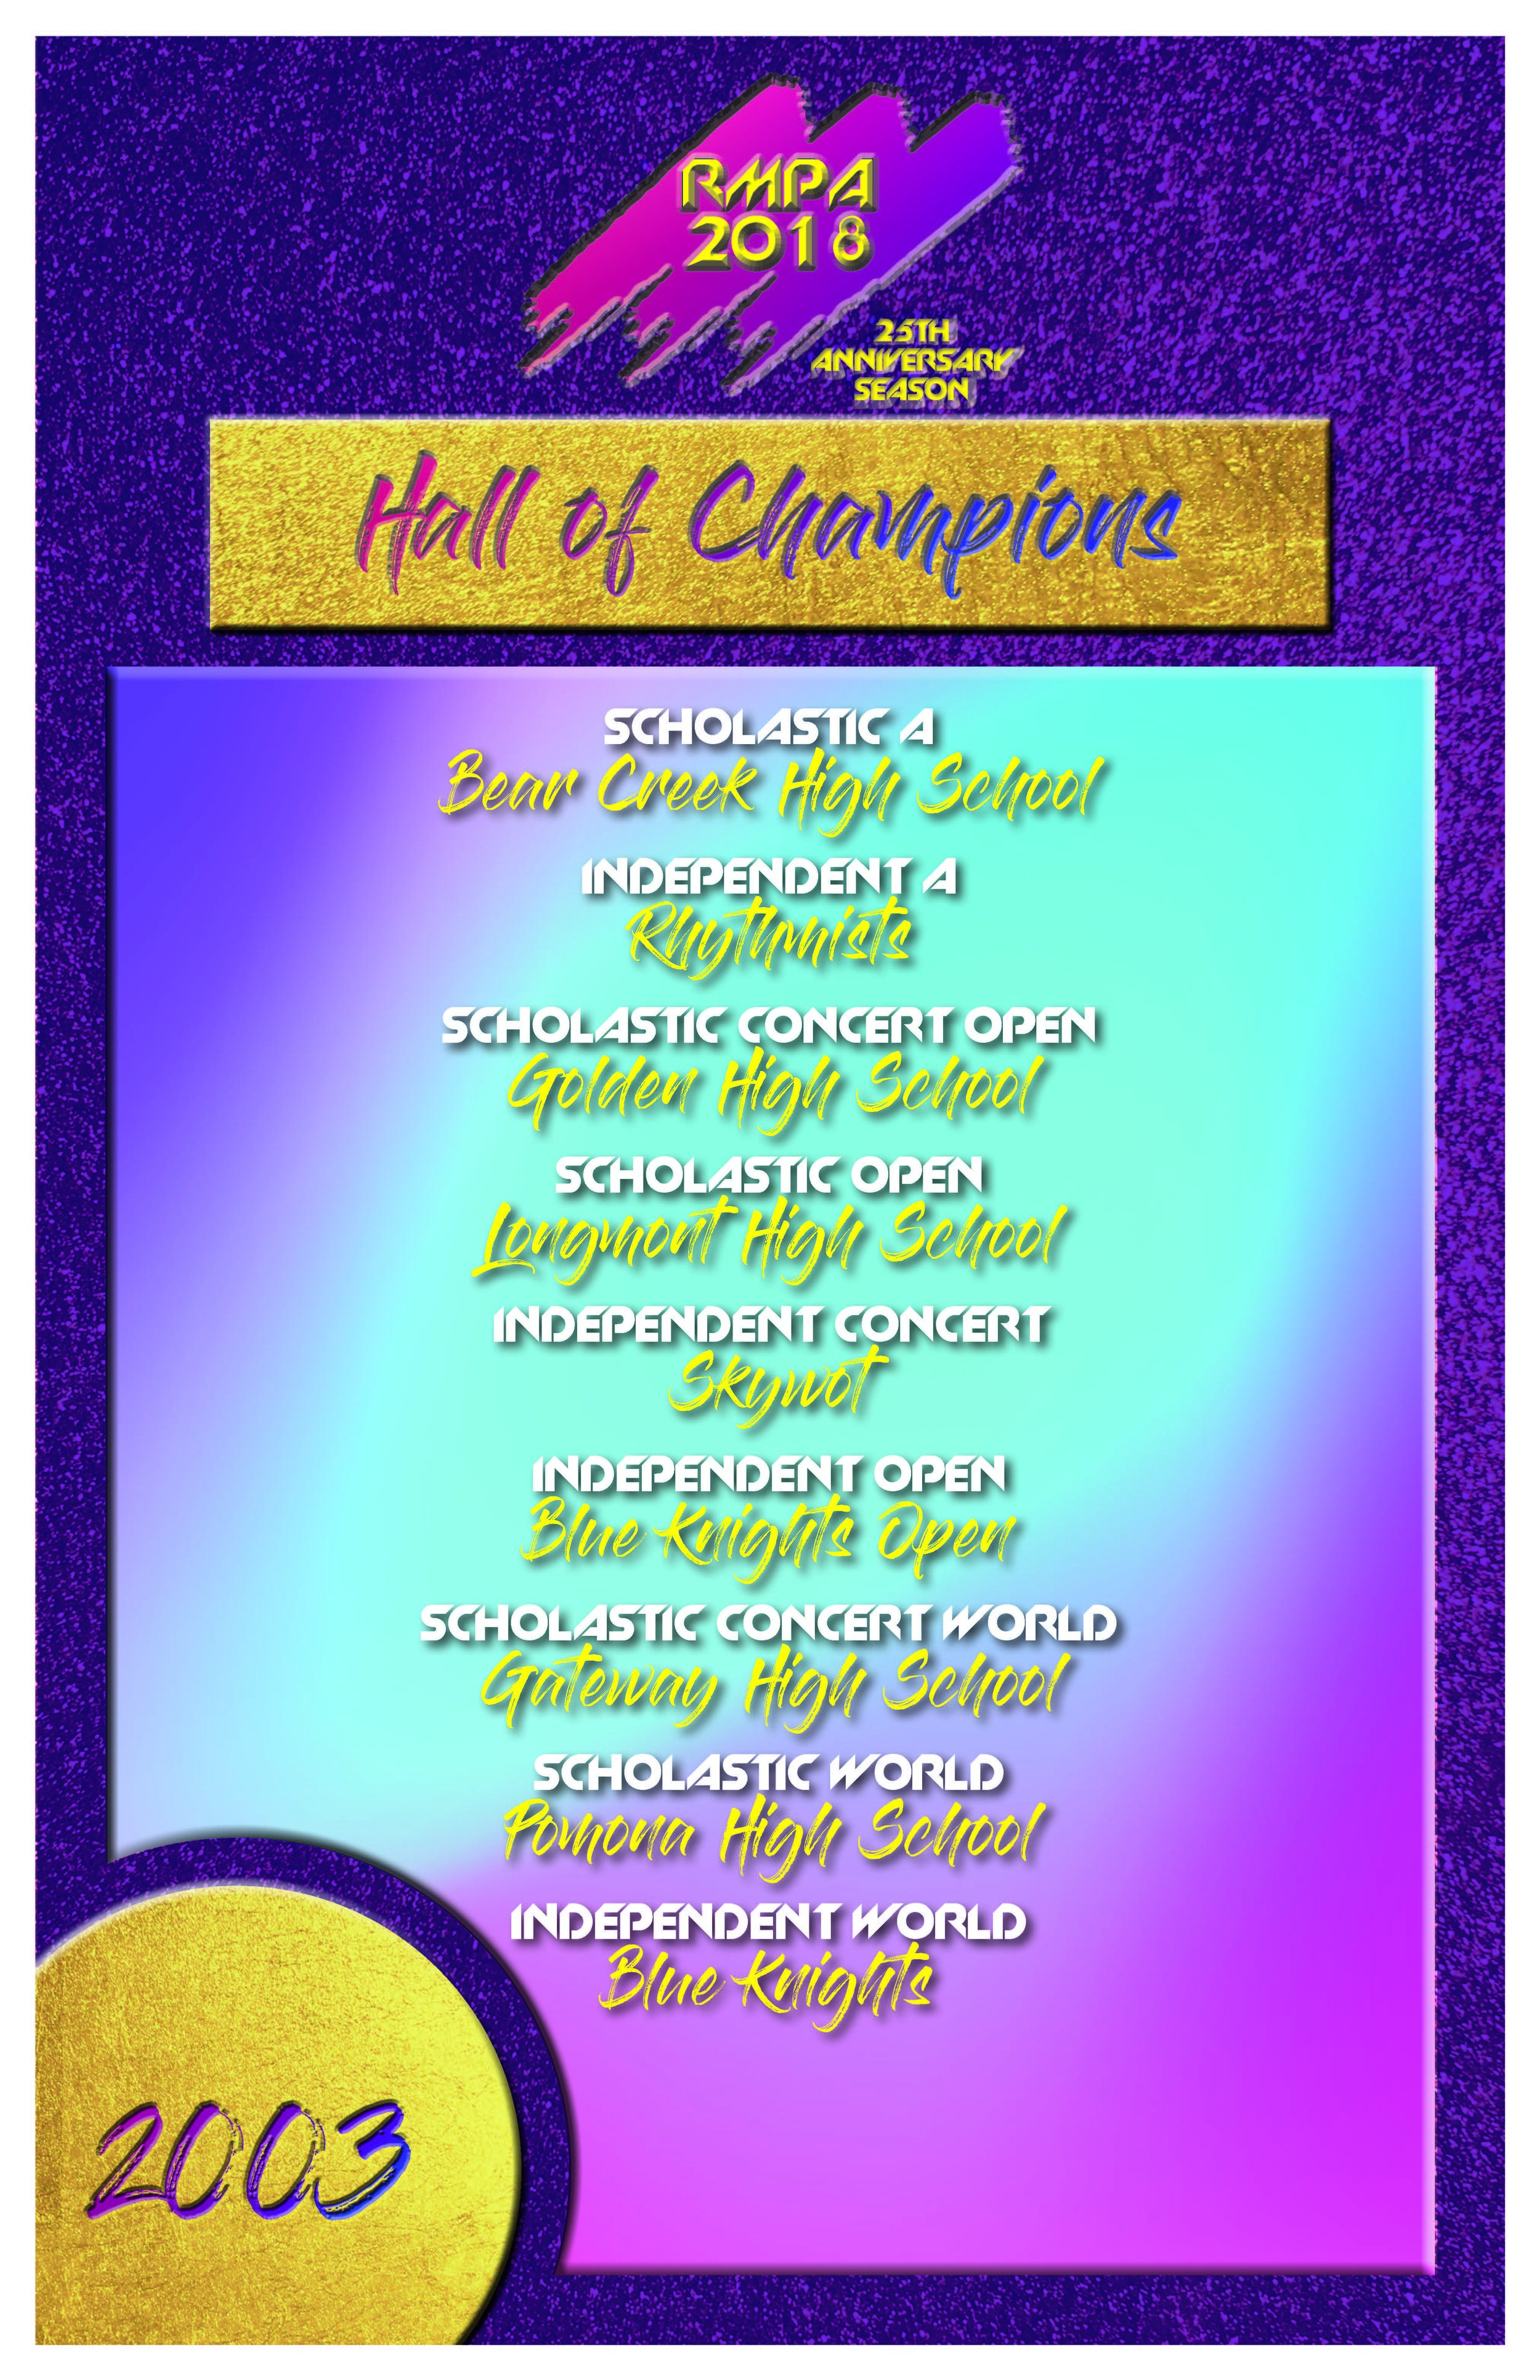 Hall of Champions Posters_Page_11.jpg